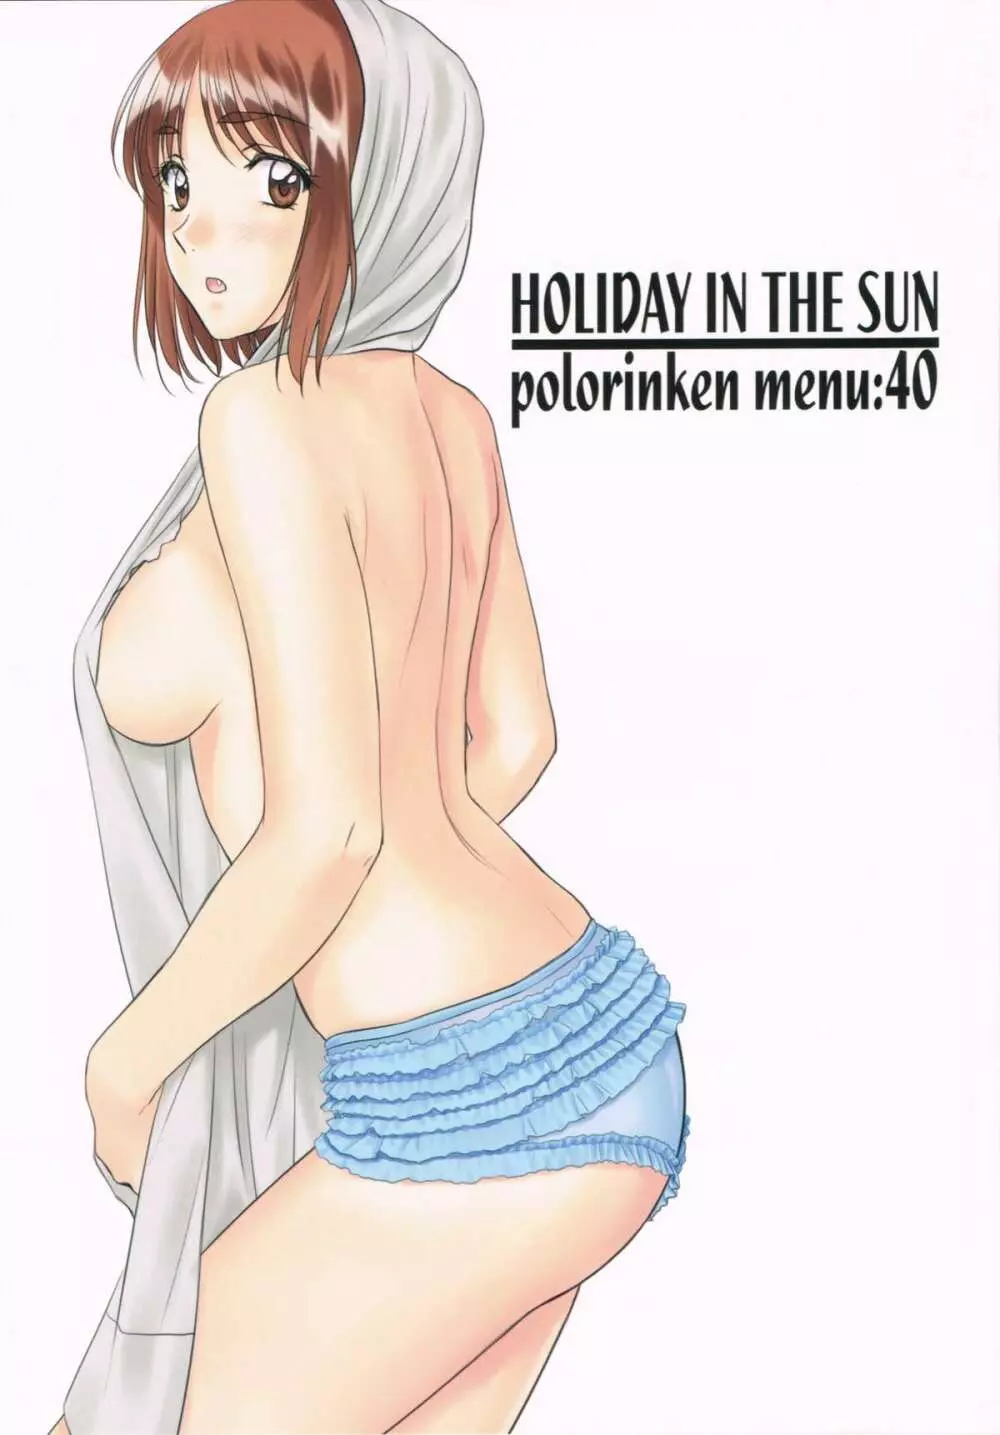 HOLIDAY IN THE SUN